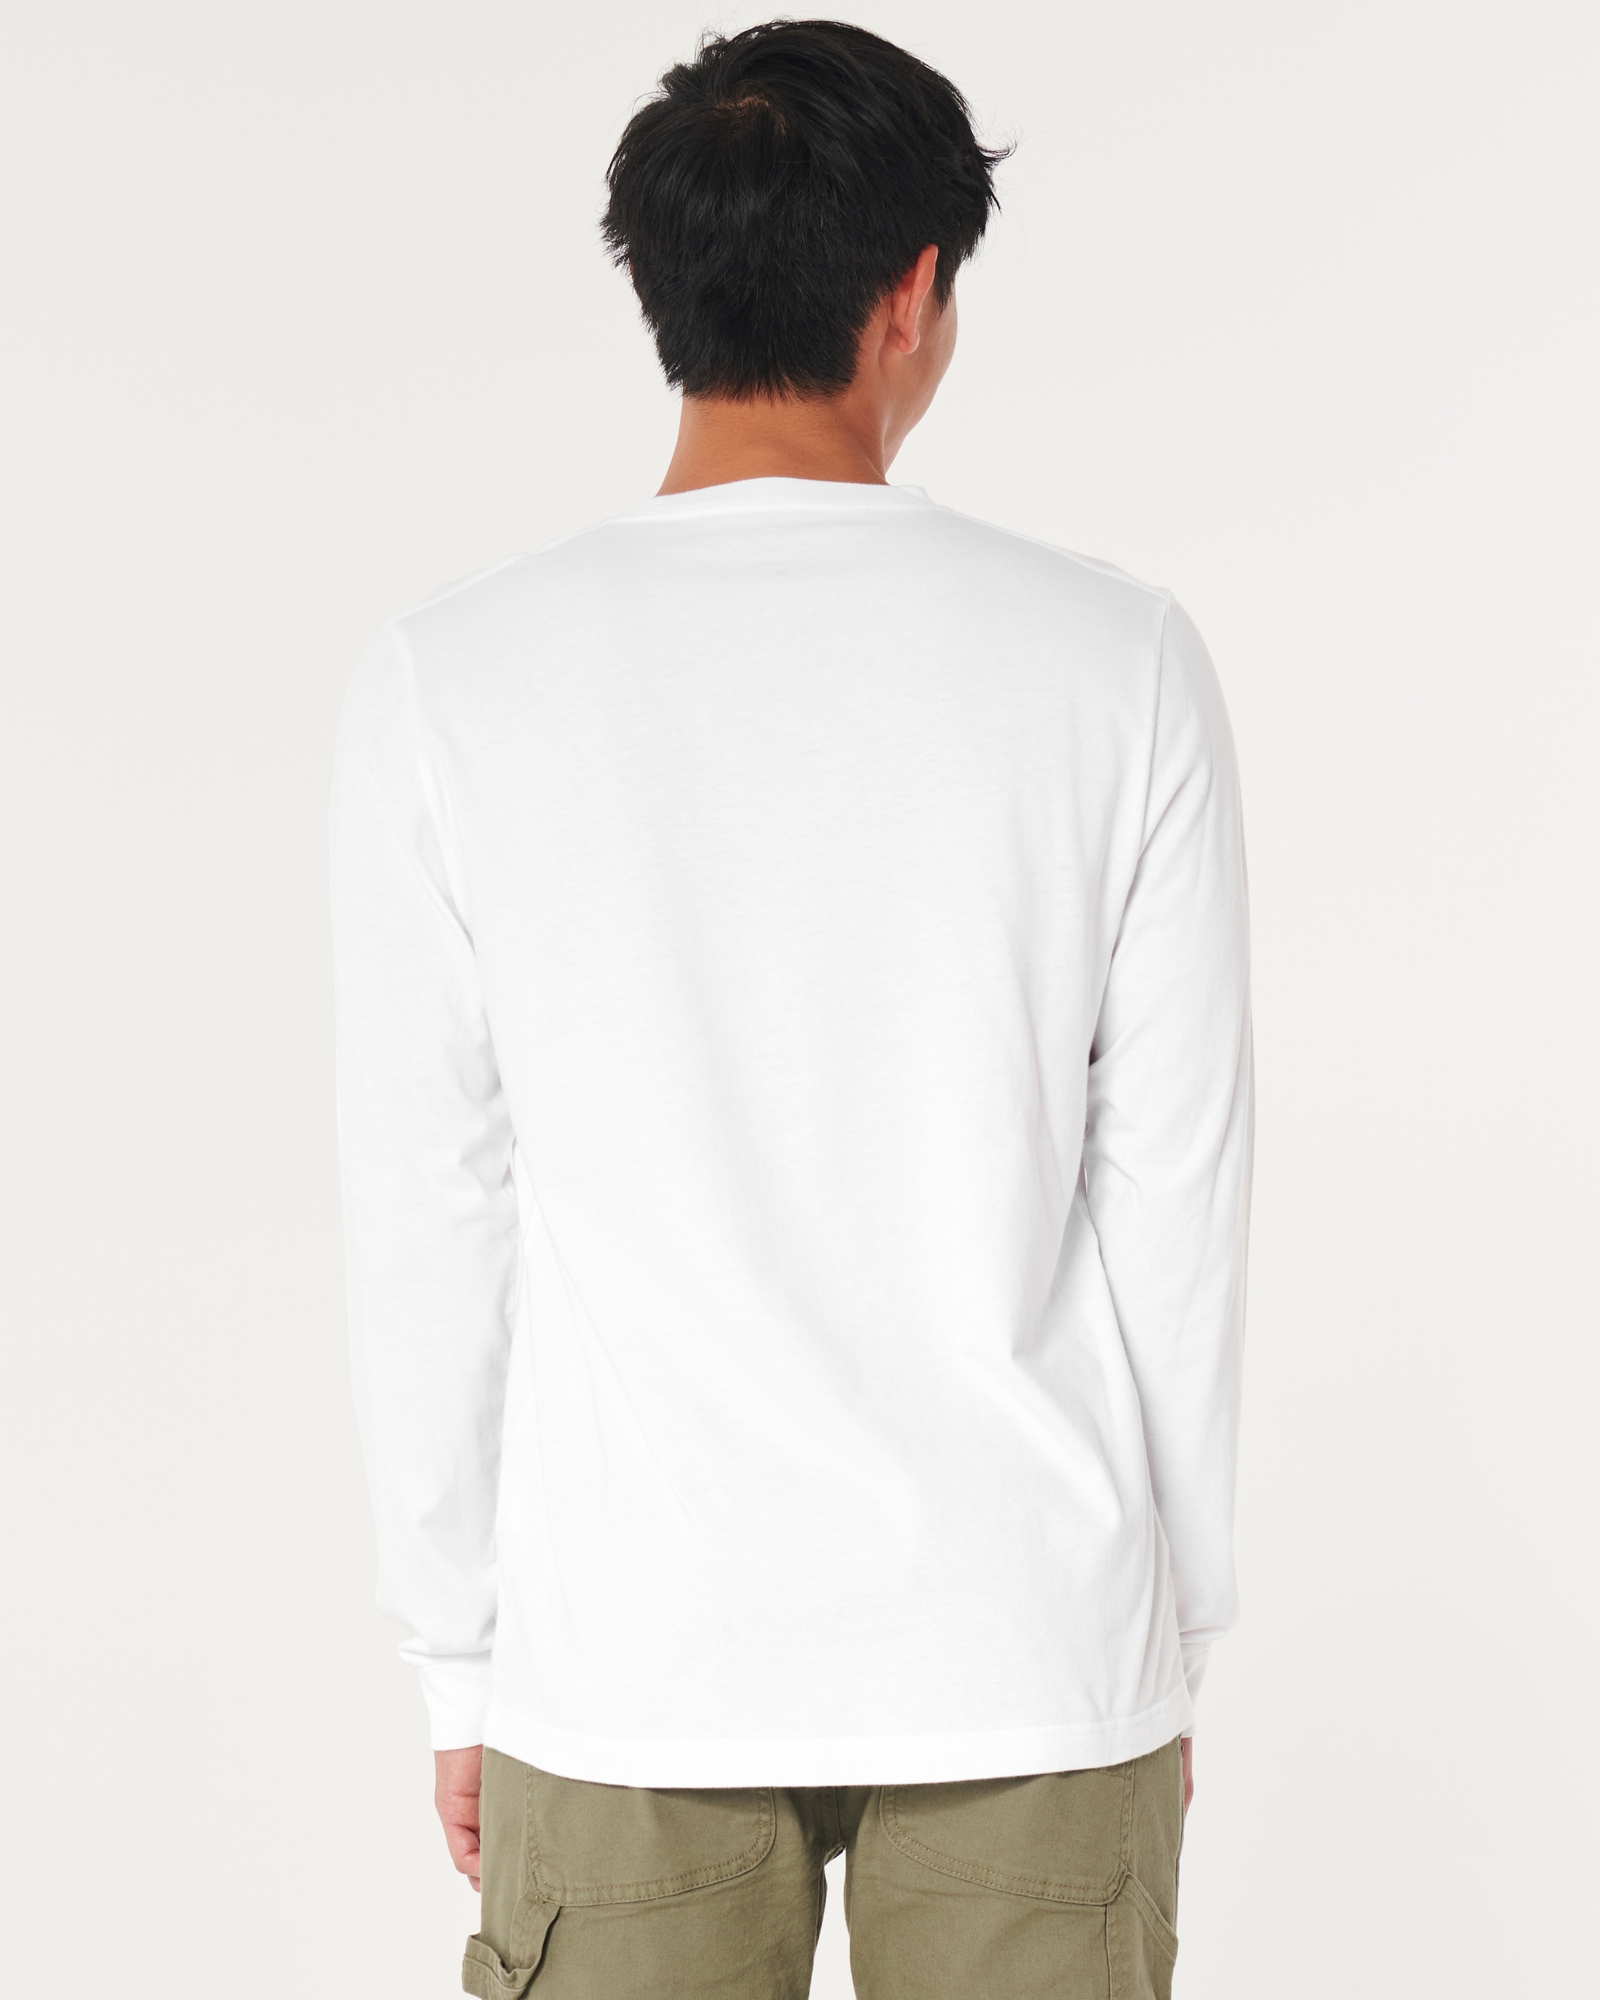 Hollister 3 pack icon logo long sleeve tops in white/gray/navy